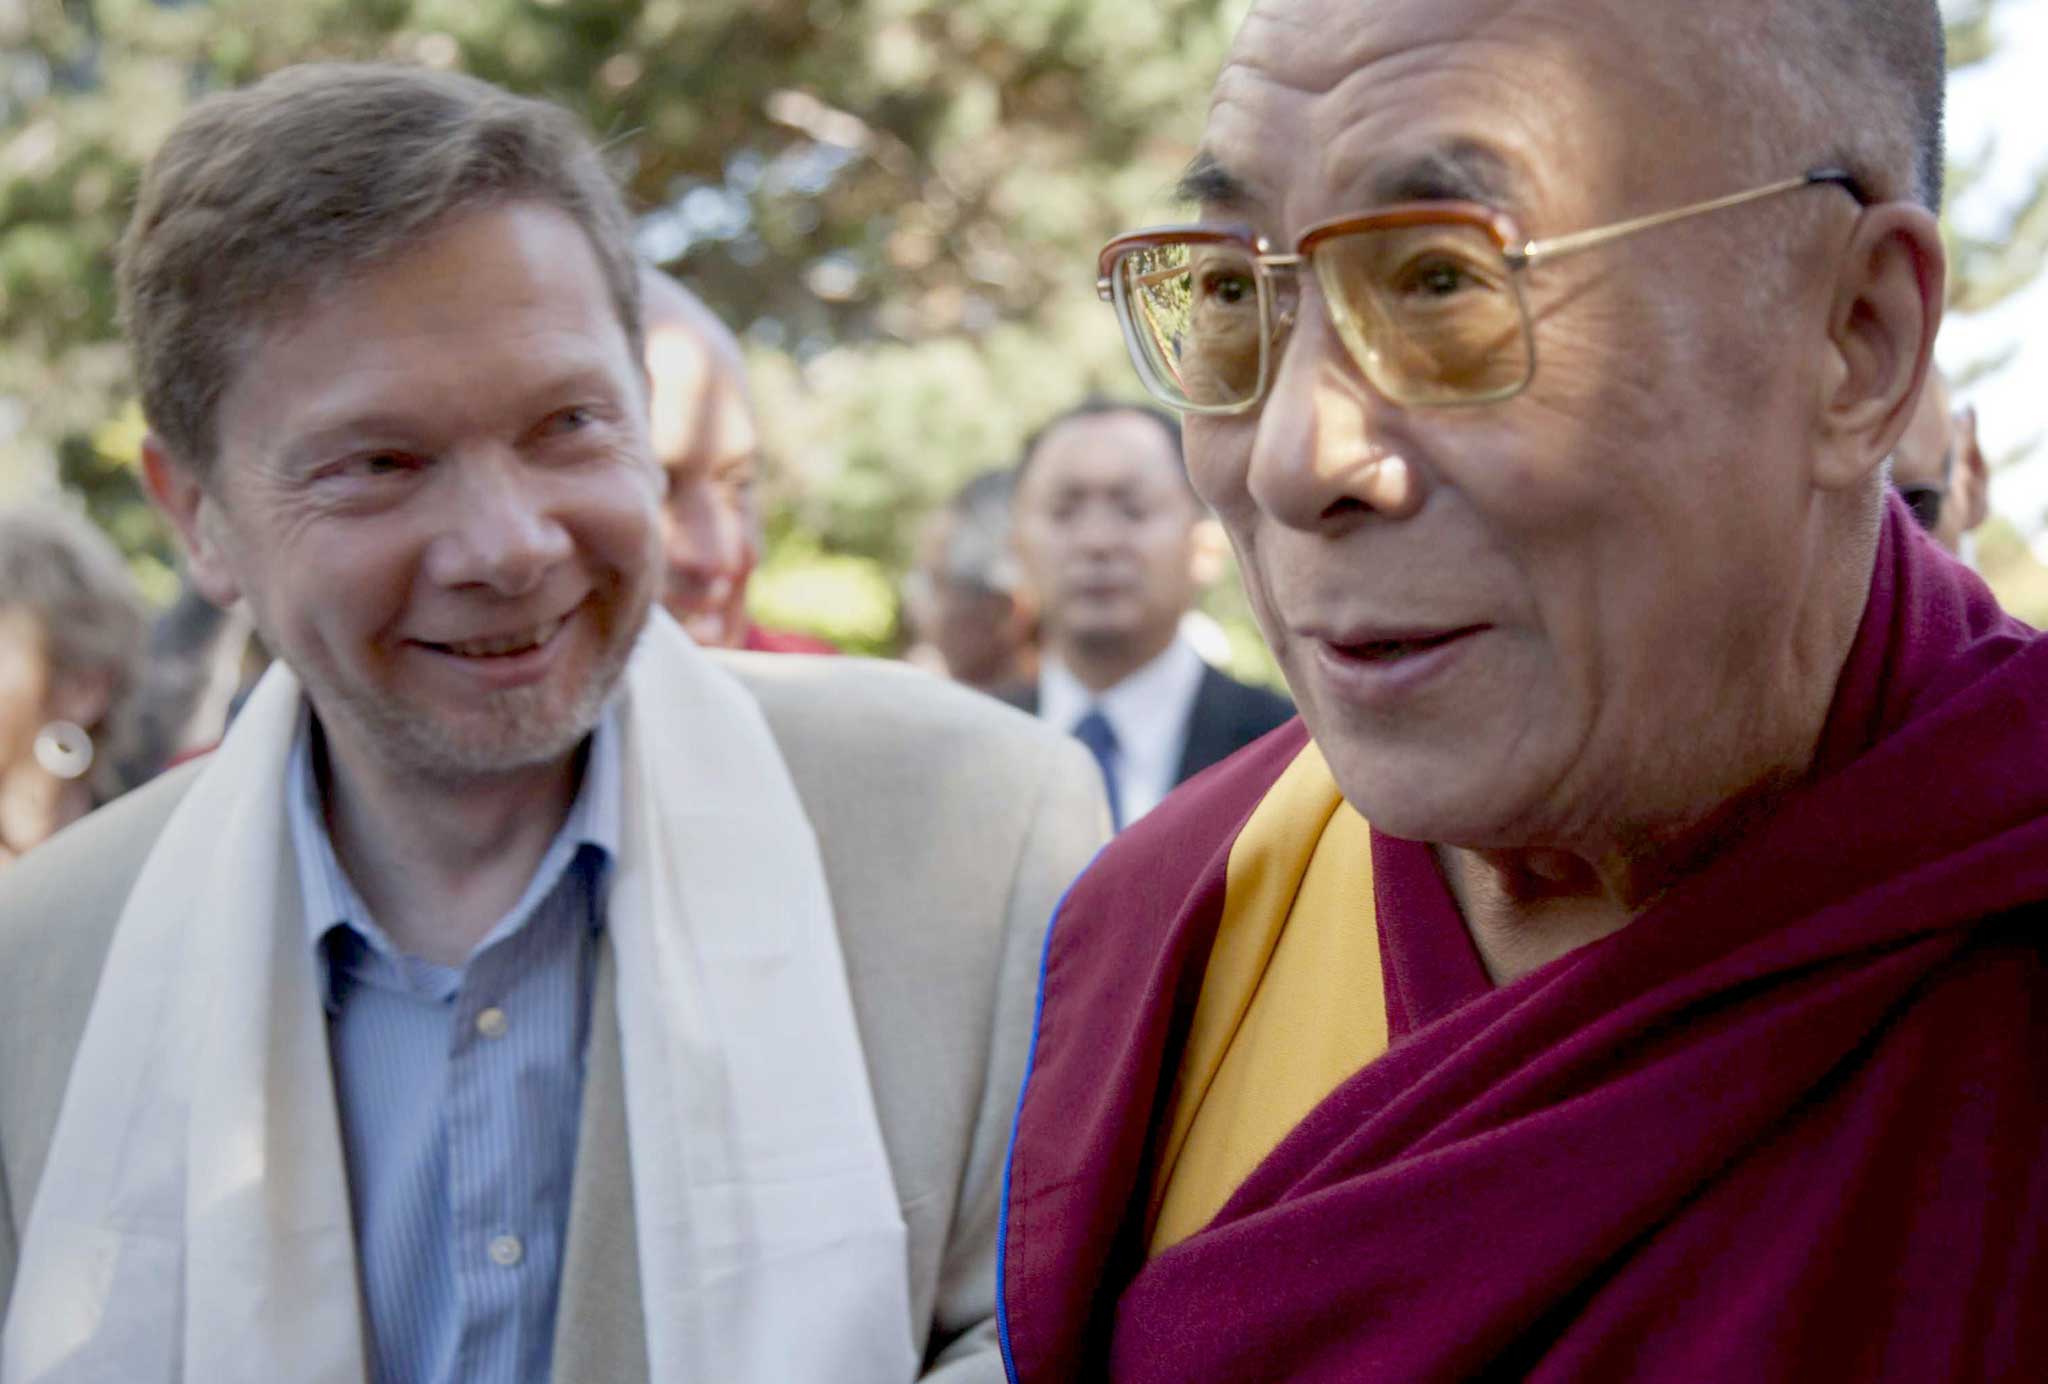 Eckhart Tolle with the Dalai Lama